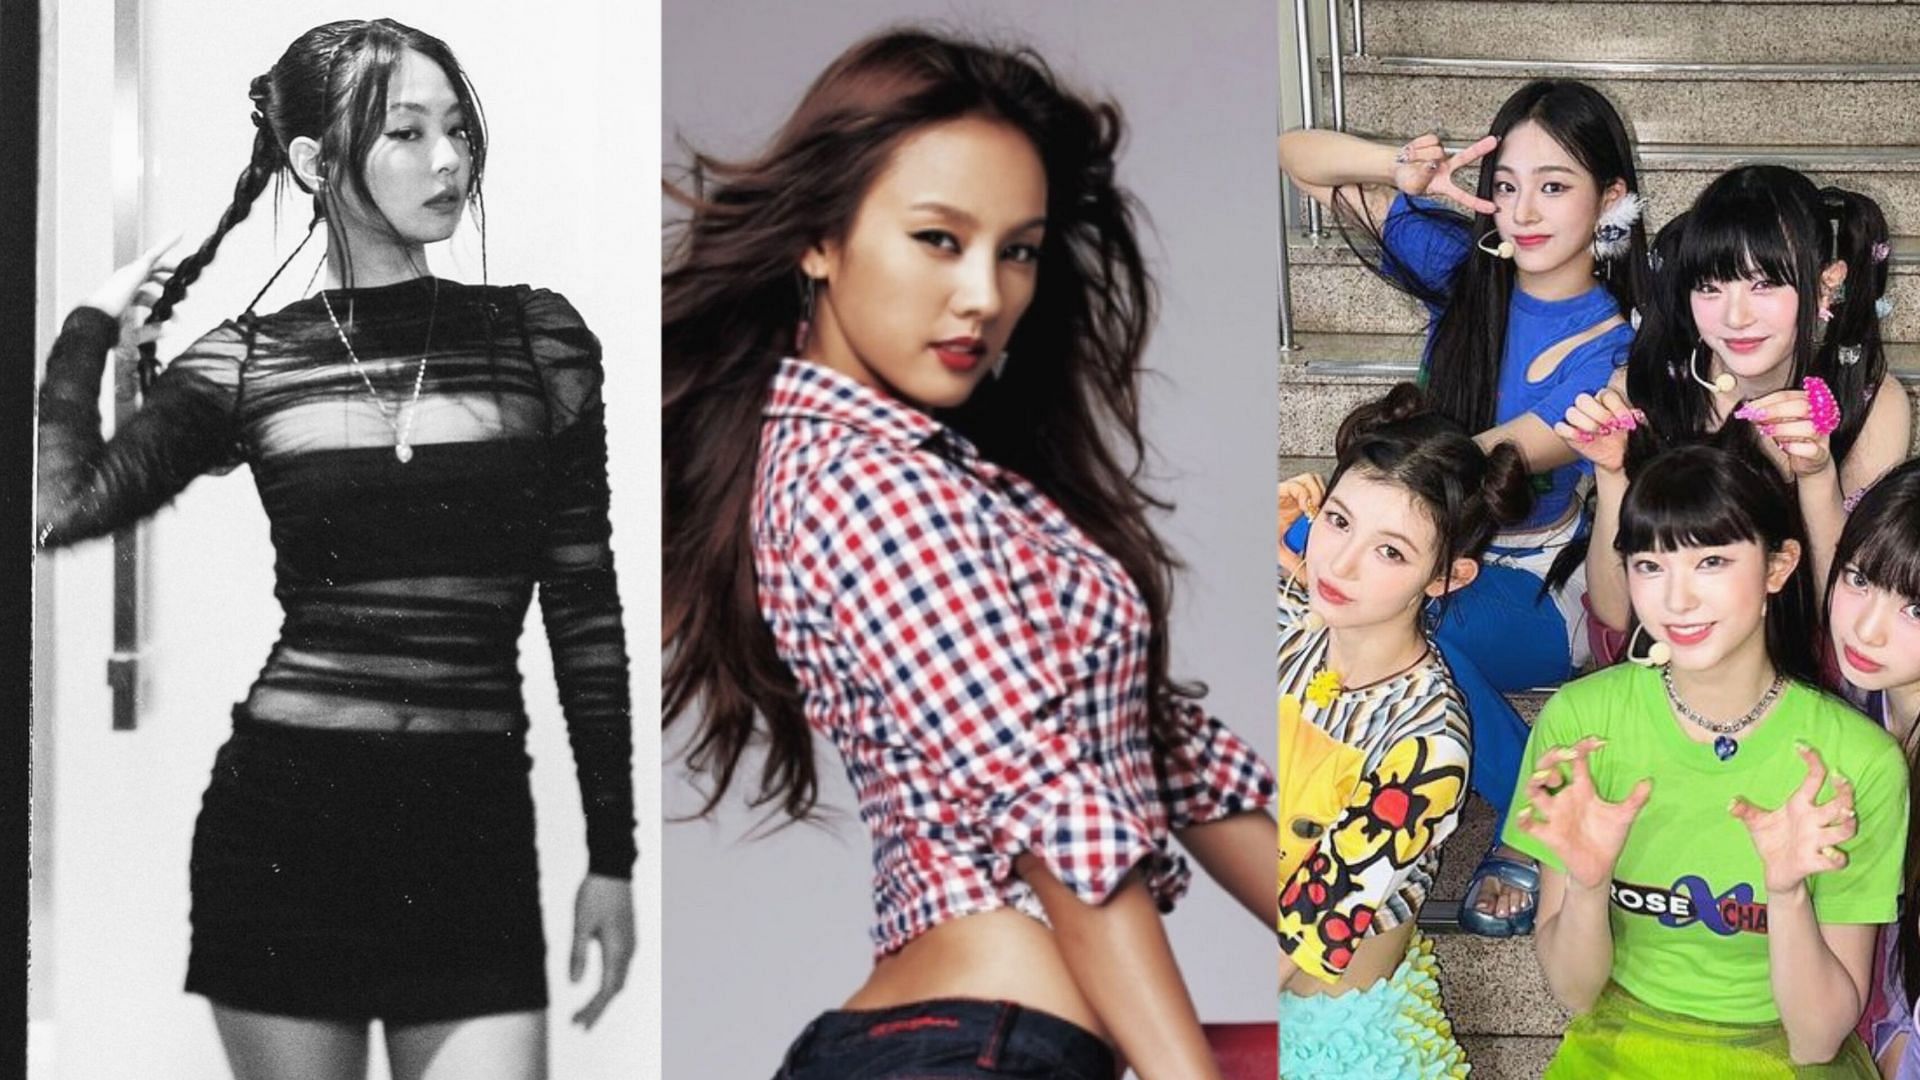 Lee Hyo-ri faces online backlash for opposing idols like Jennie and New Jeans wearing revealing clothes (Images via Instagram/@jennierubyjane @lee_hyolee @newjeans_official)